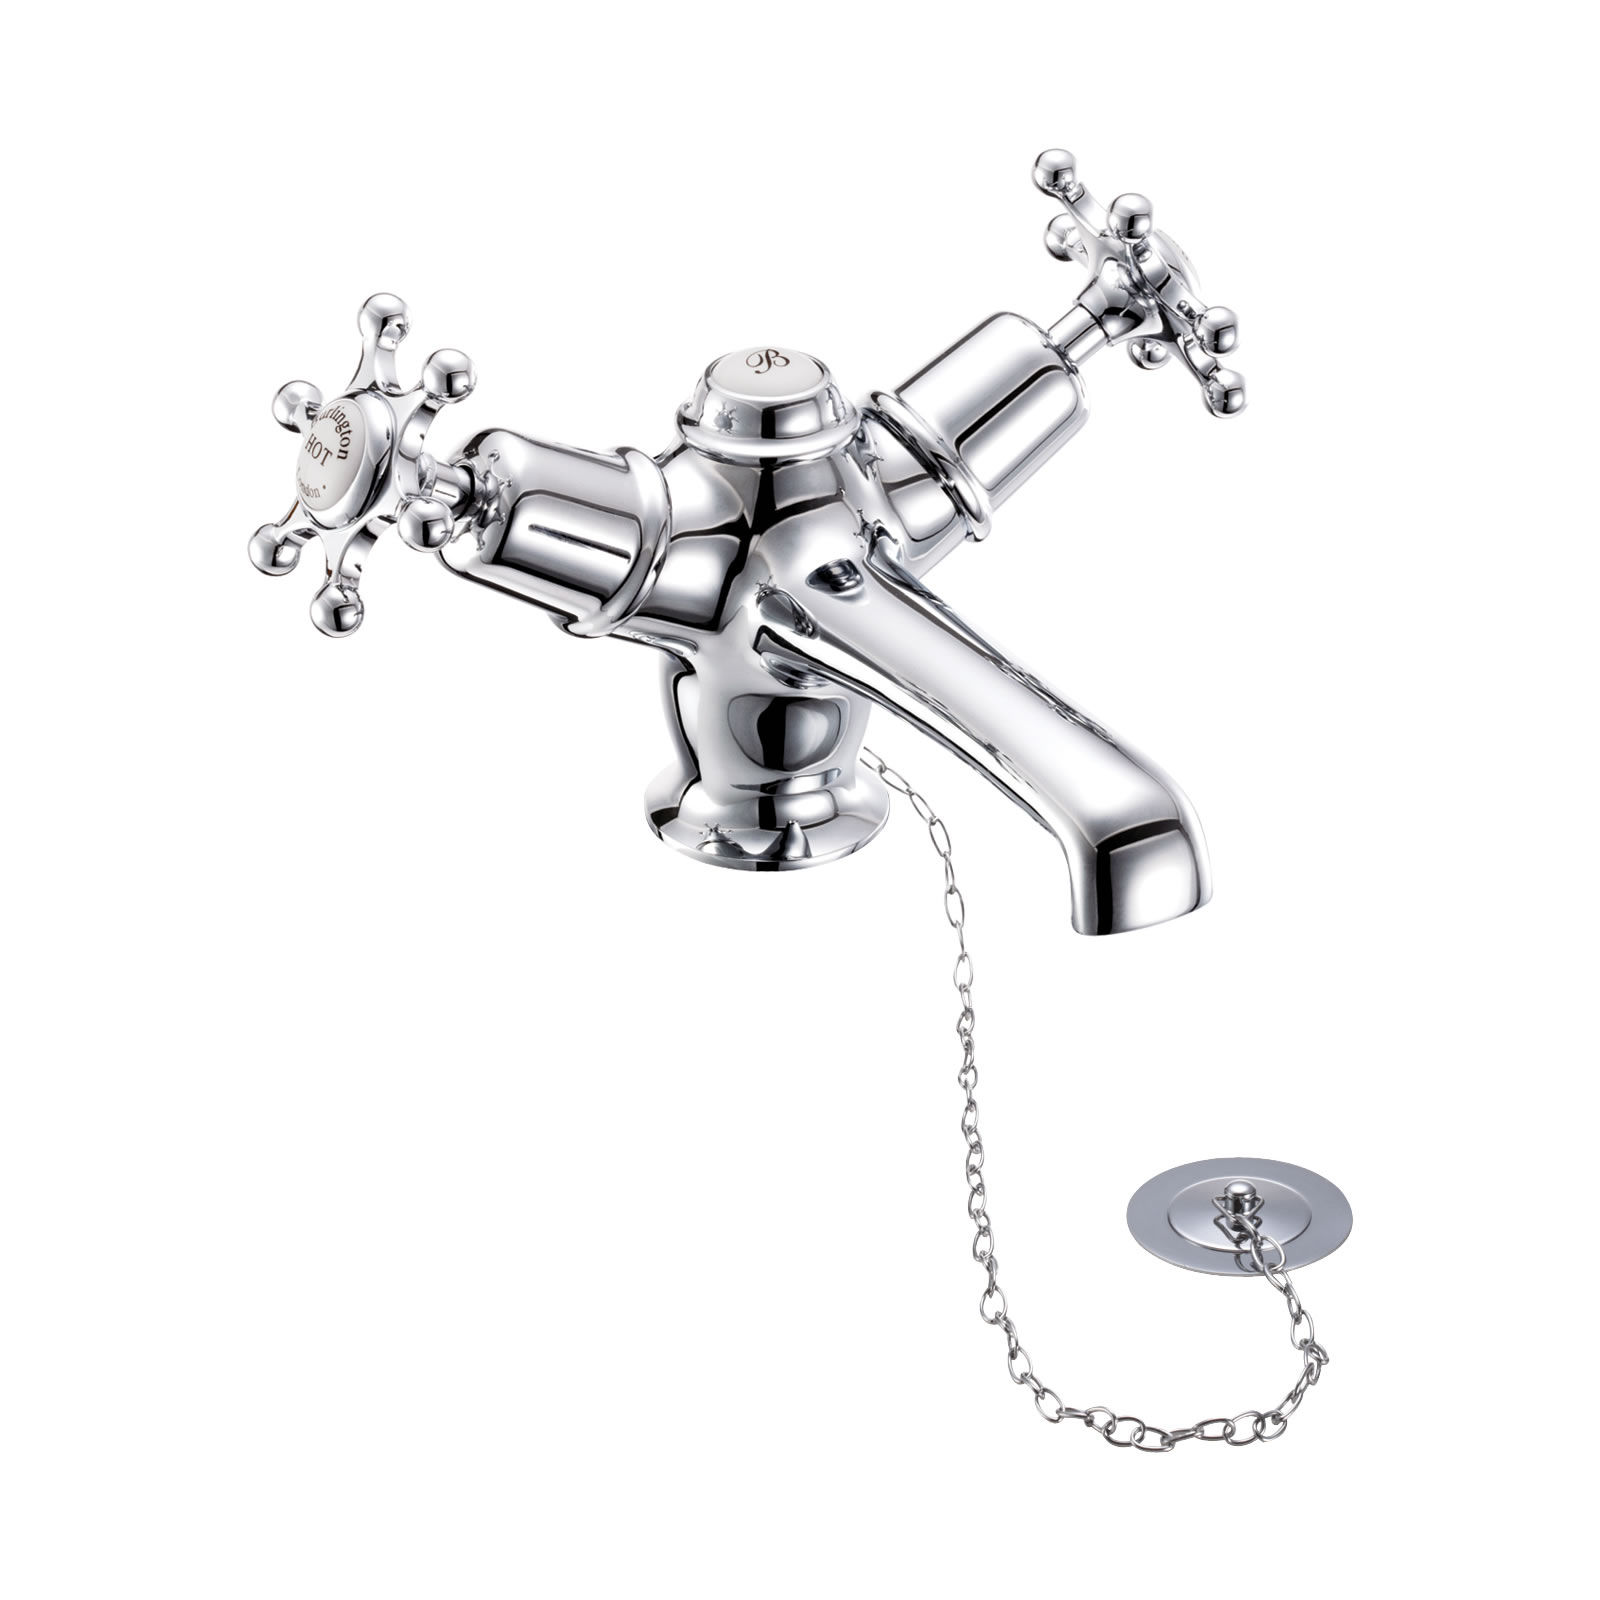 Birkenhead basin mixer with low central indice with click-clack waste